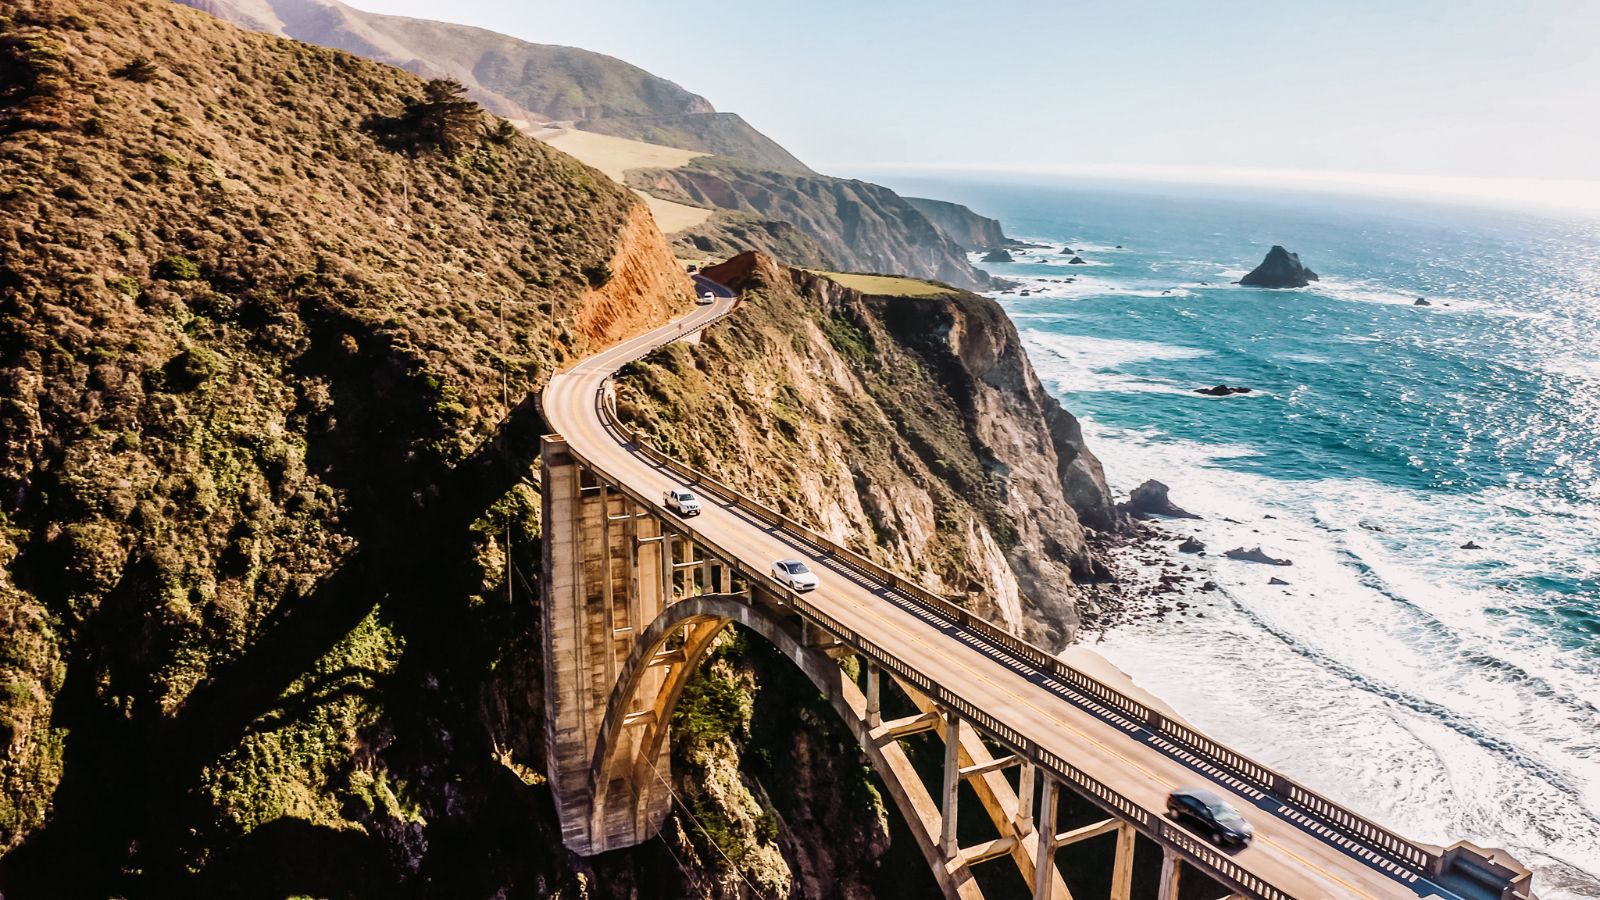 <p>Taking a road trip up or down the US West Coast is a dream vacation for many. Whether you hanker after the golden beaches of California or the ice fields of Alaska, there’s something for every traveler on the Pacific Seaboard. From south to north, here are a dozen wonderful spots to stop at when driving the US West Coast. </p>